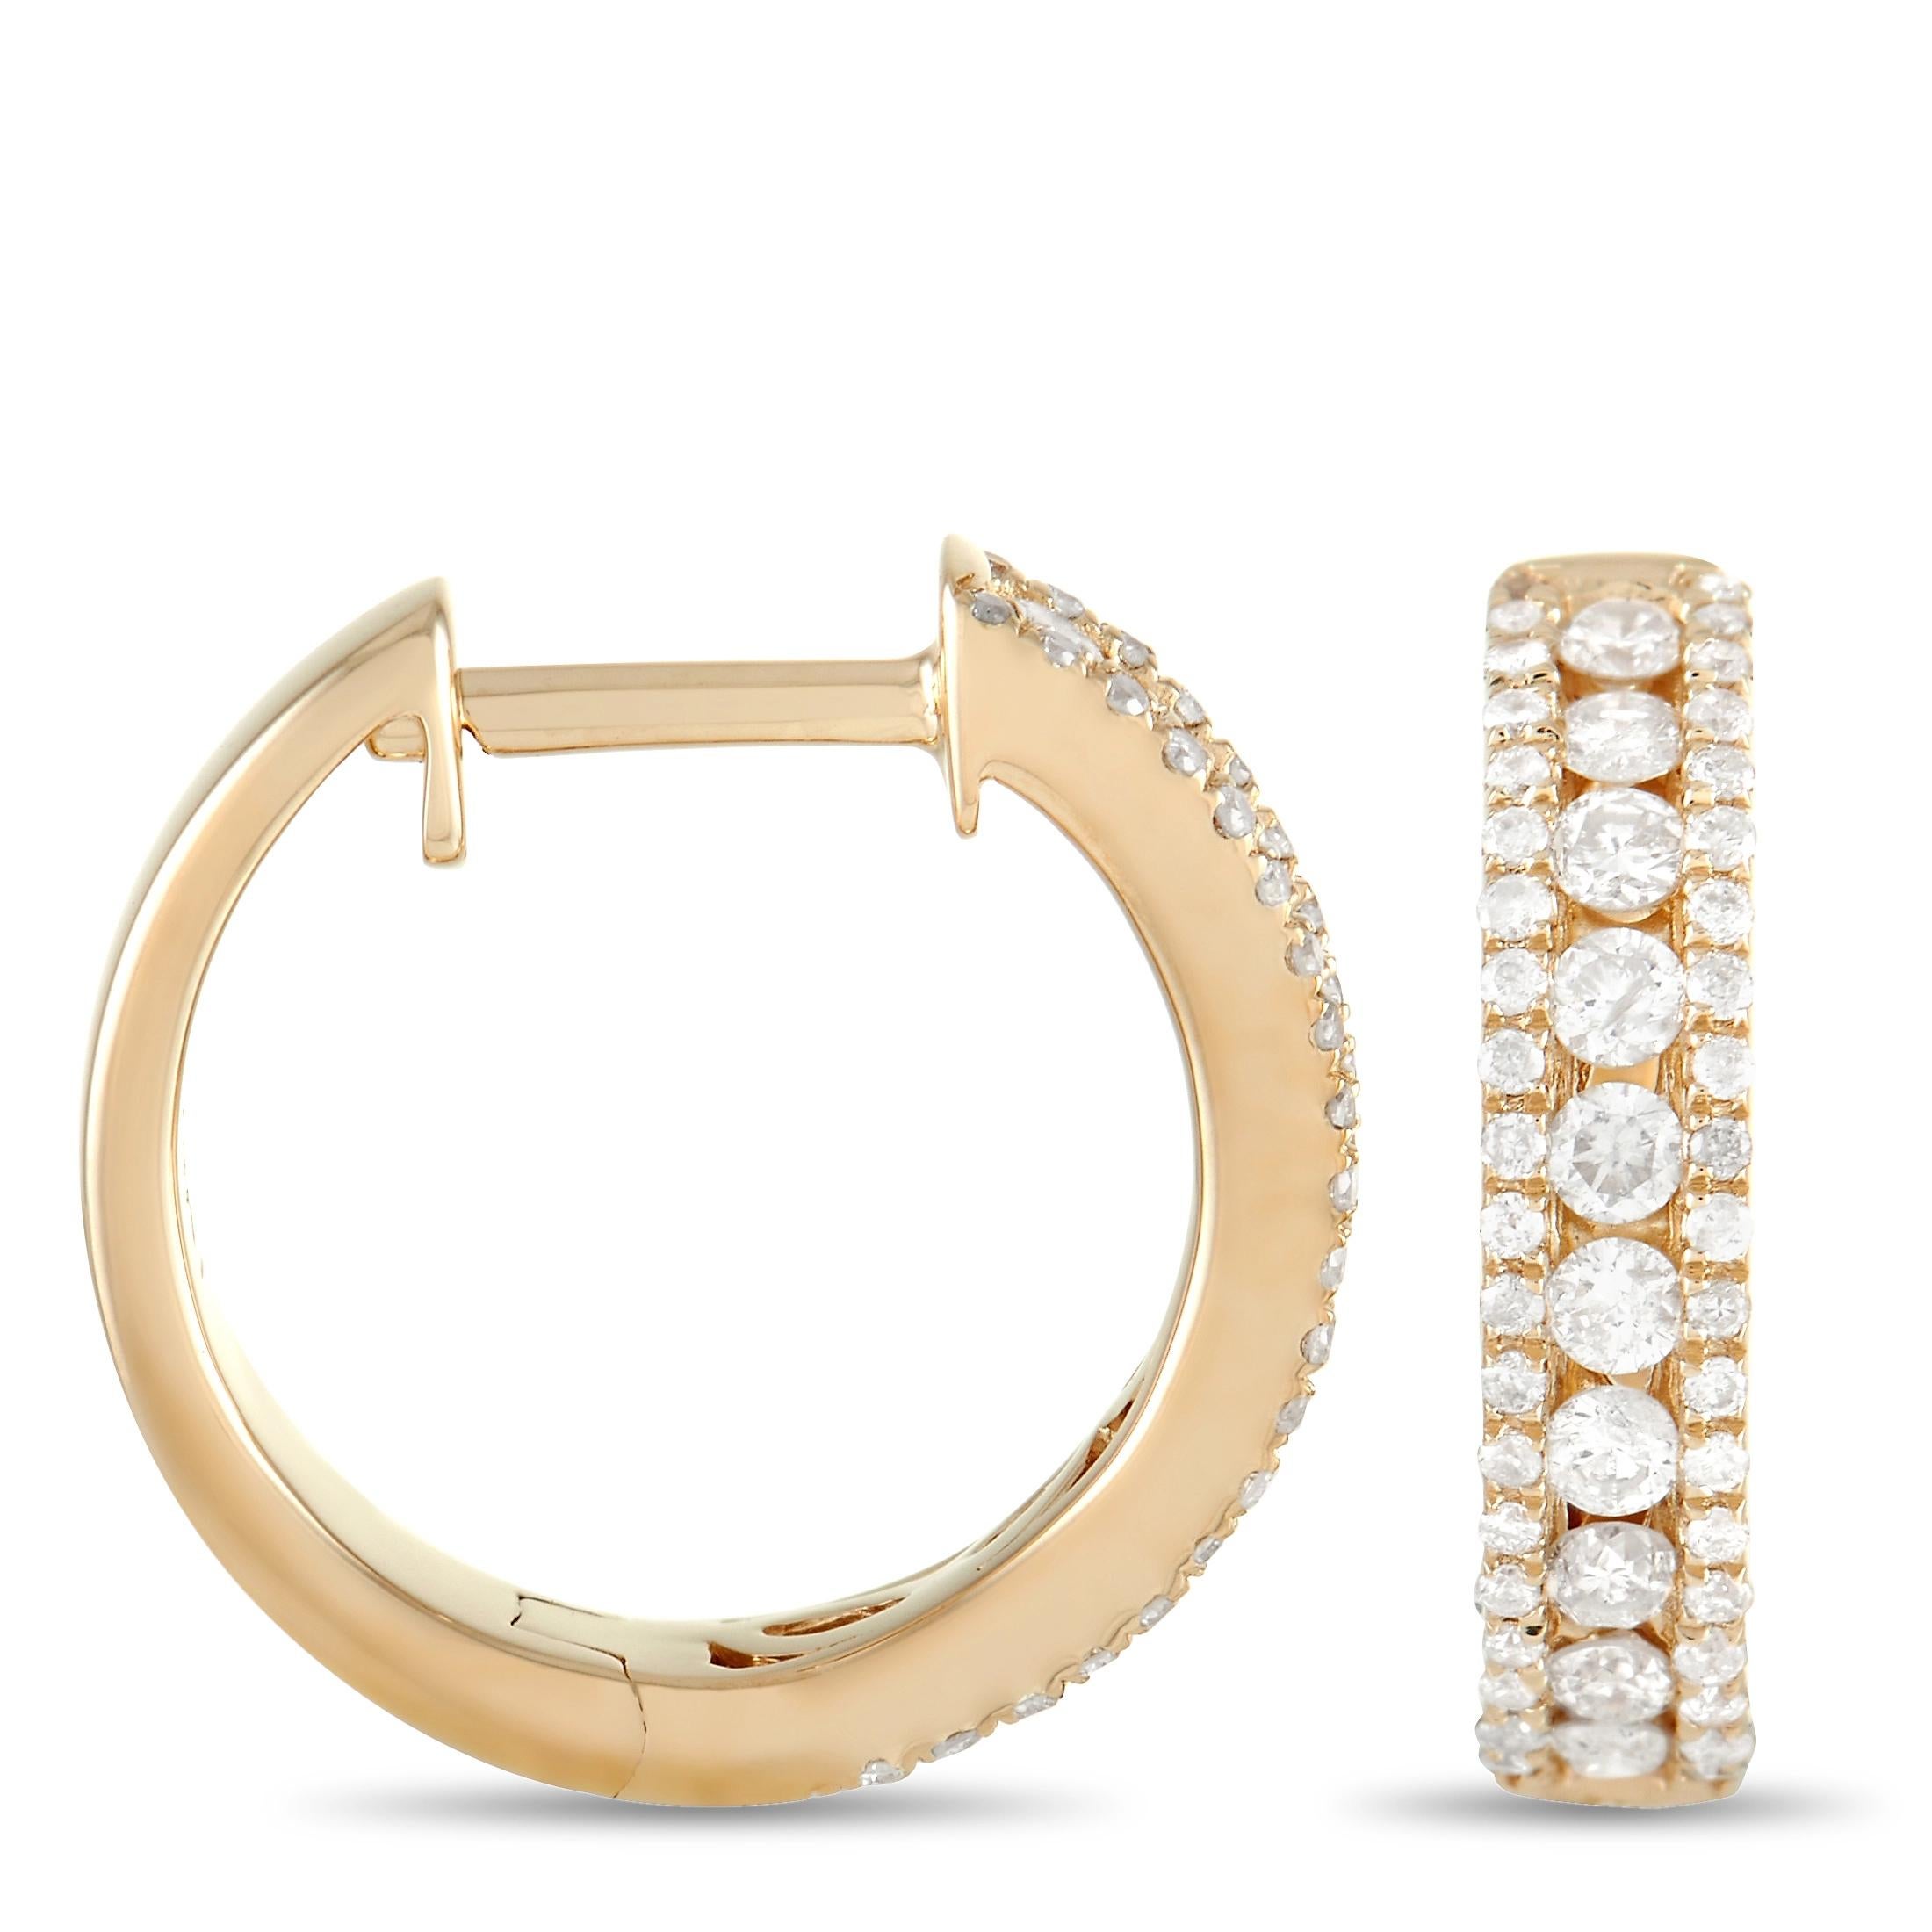 A timeless pairing of 14K yellow gold and shimmering diamonds make these earrings simply exquisite. Each one measures 0.5” round and showcases three rows of diamonds, which together possess a total weight of 0.50 carats. 

This jewelry piece is